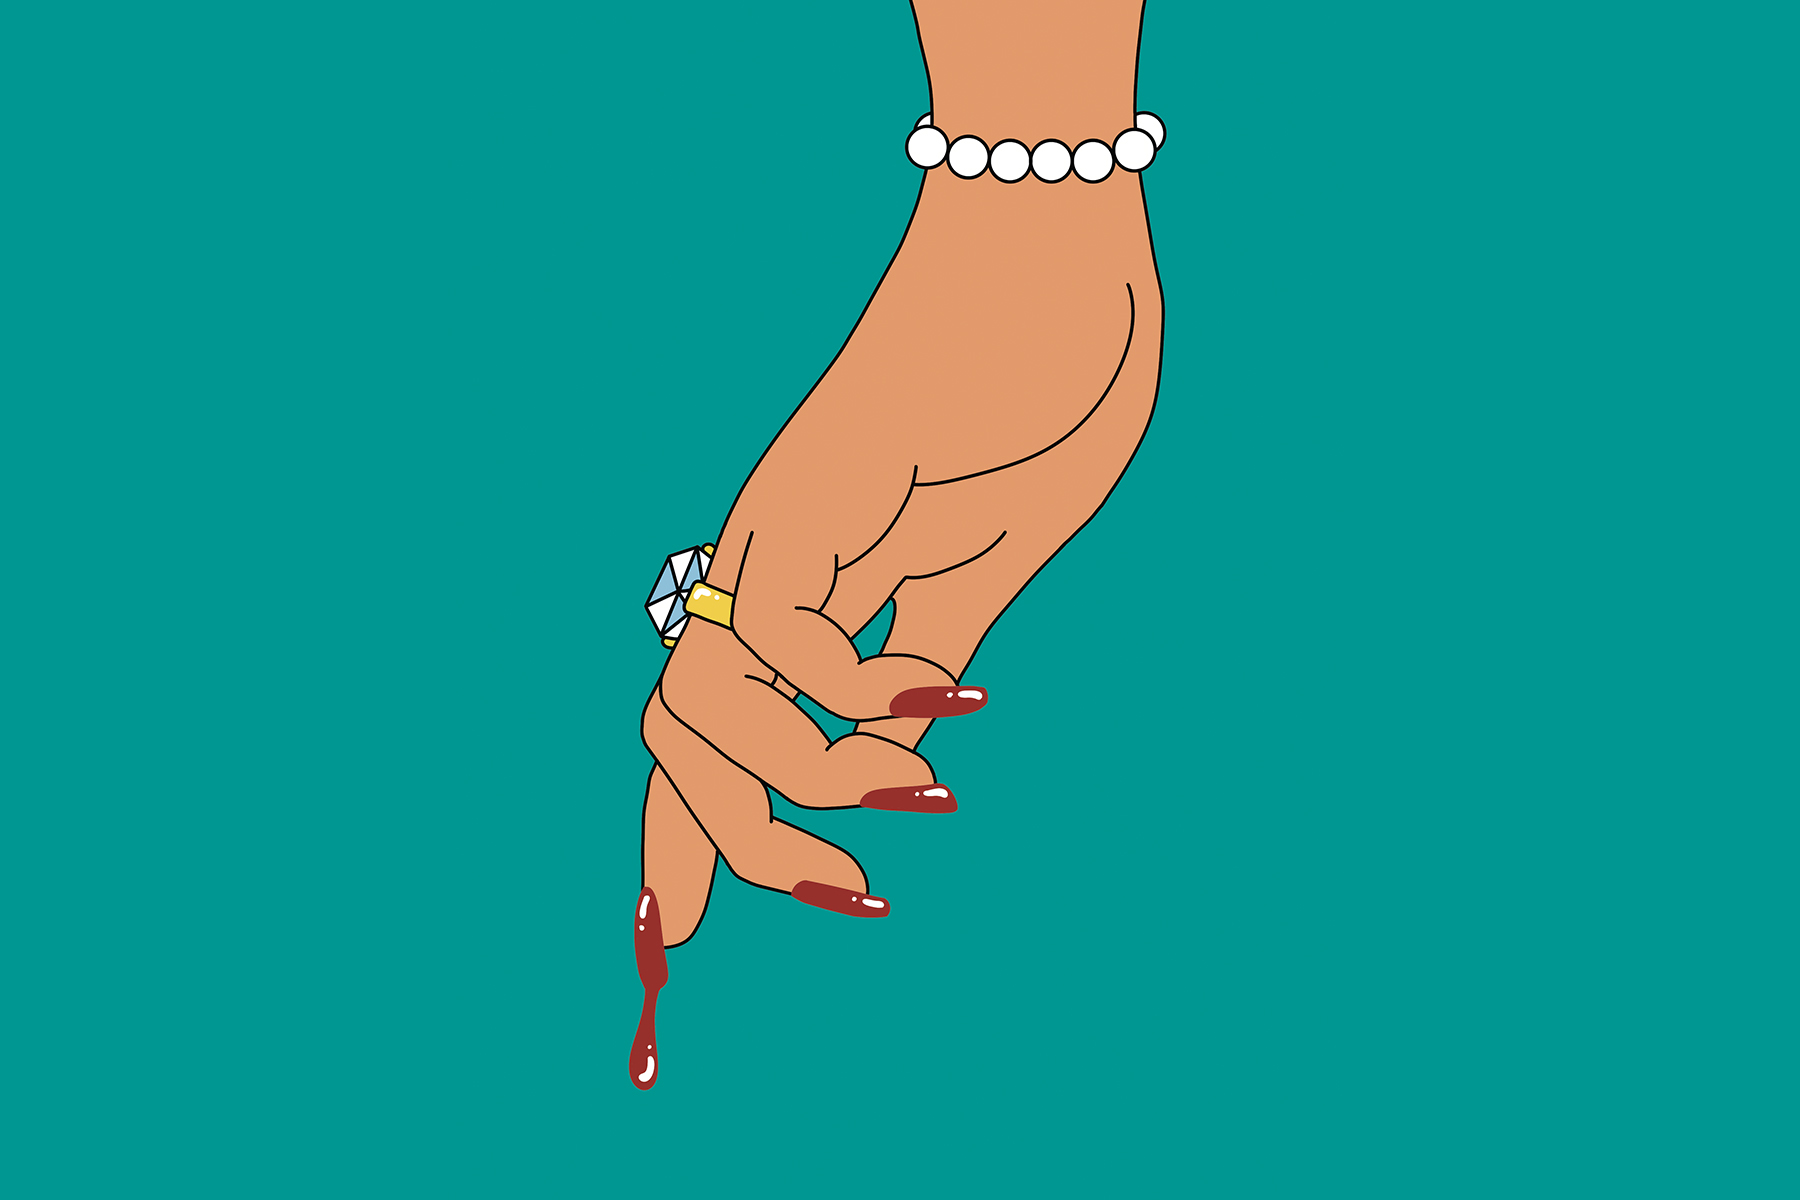 An illustration of blood dripping from the manicured fingernail of a hand with a diamond ring and pearl bracelet.